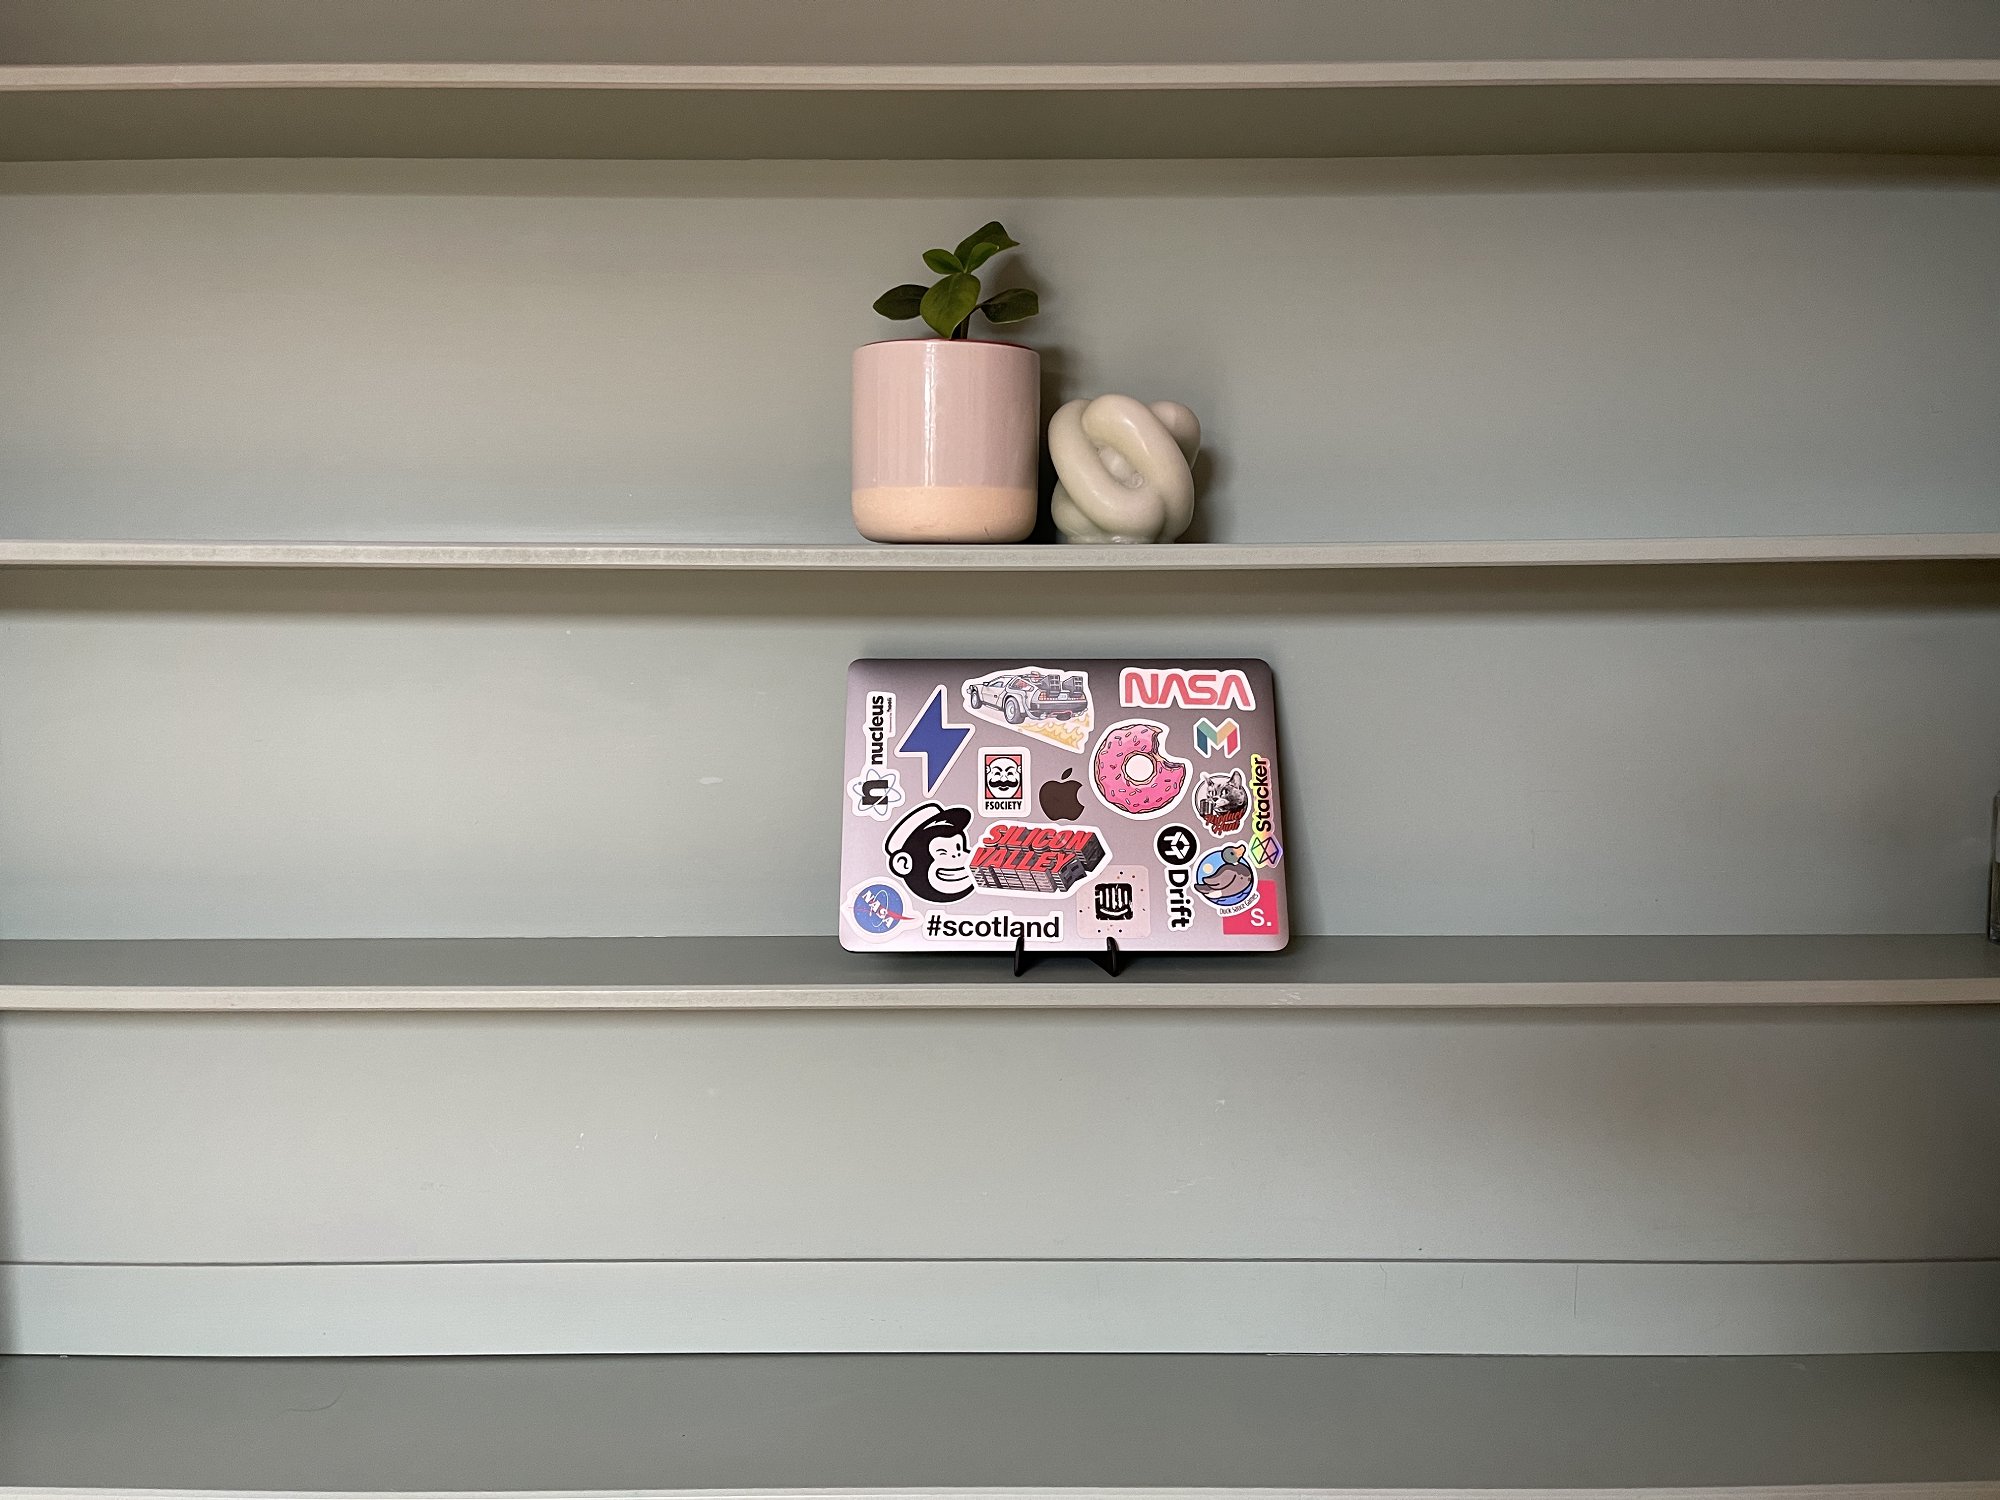 An Apple MacBook and a potted indoor plant on the shelves